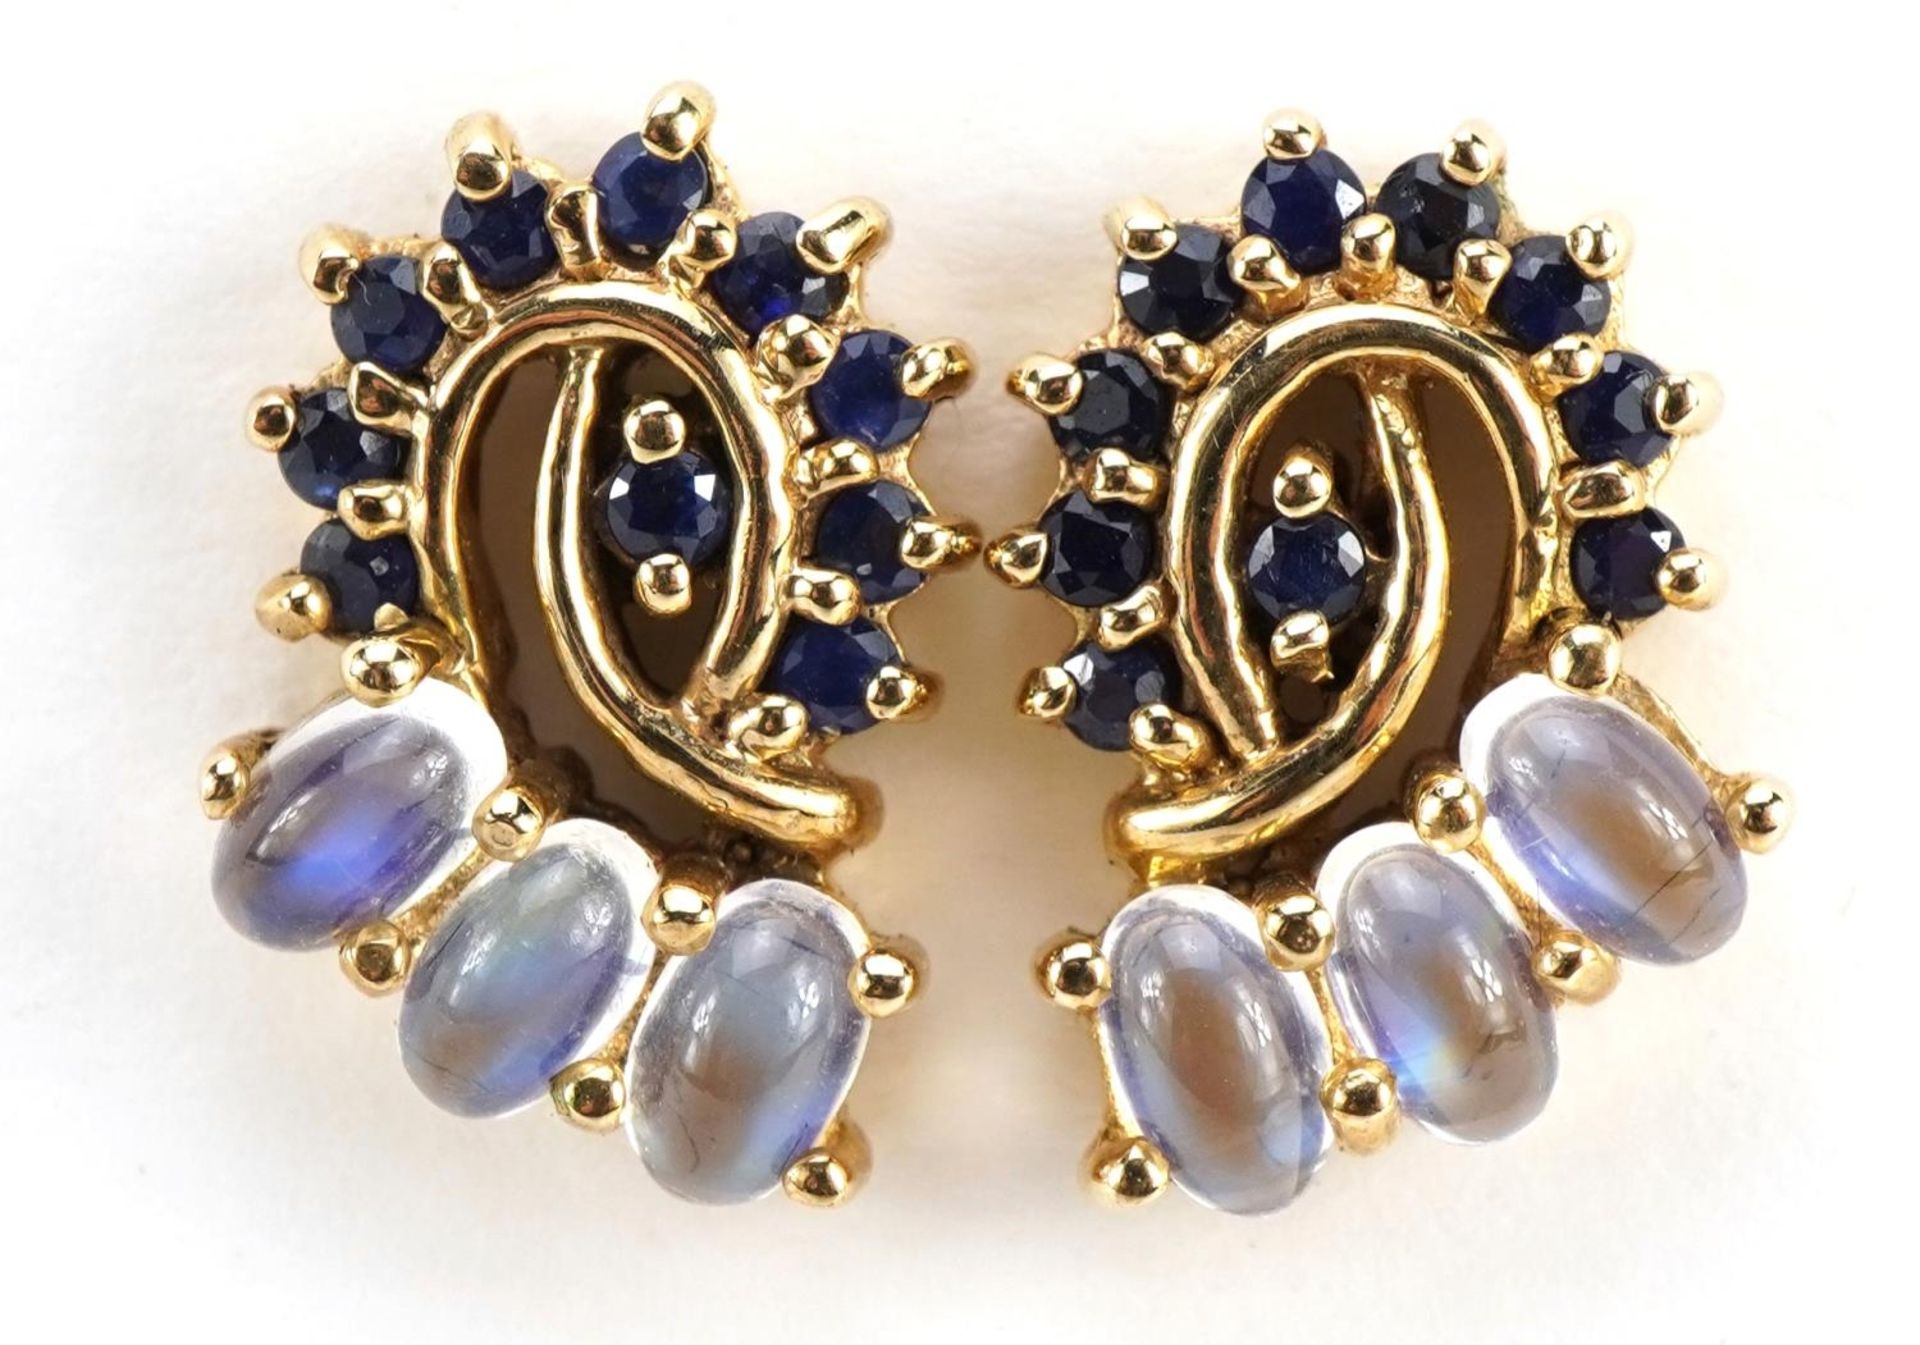 Pair of 9ct gold moonstone and sapphire stud earrings, 1.6cm high, 5.2g